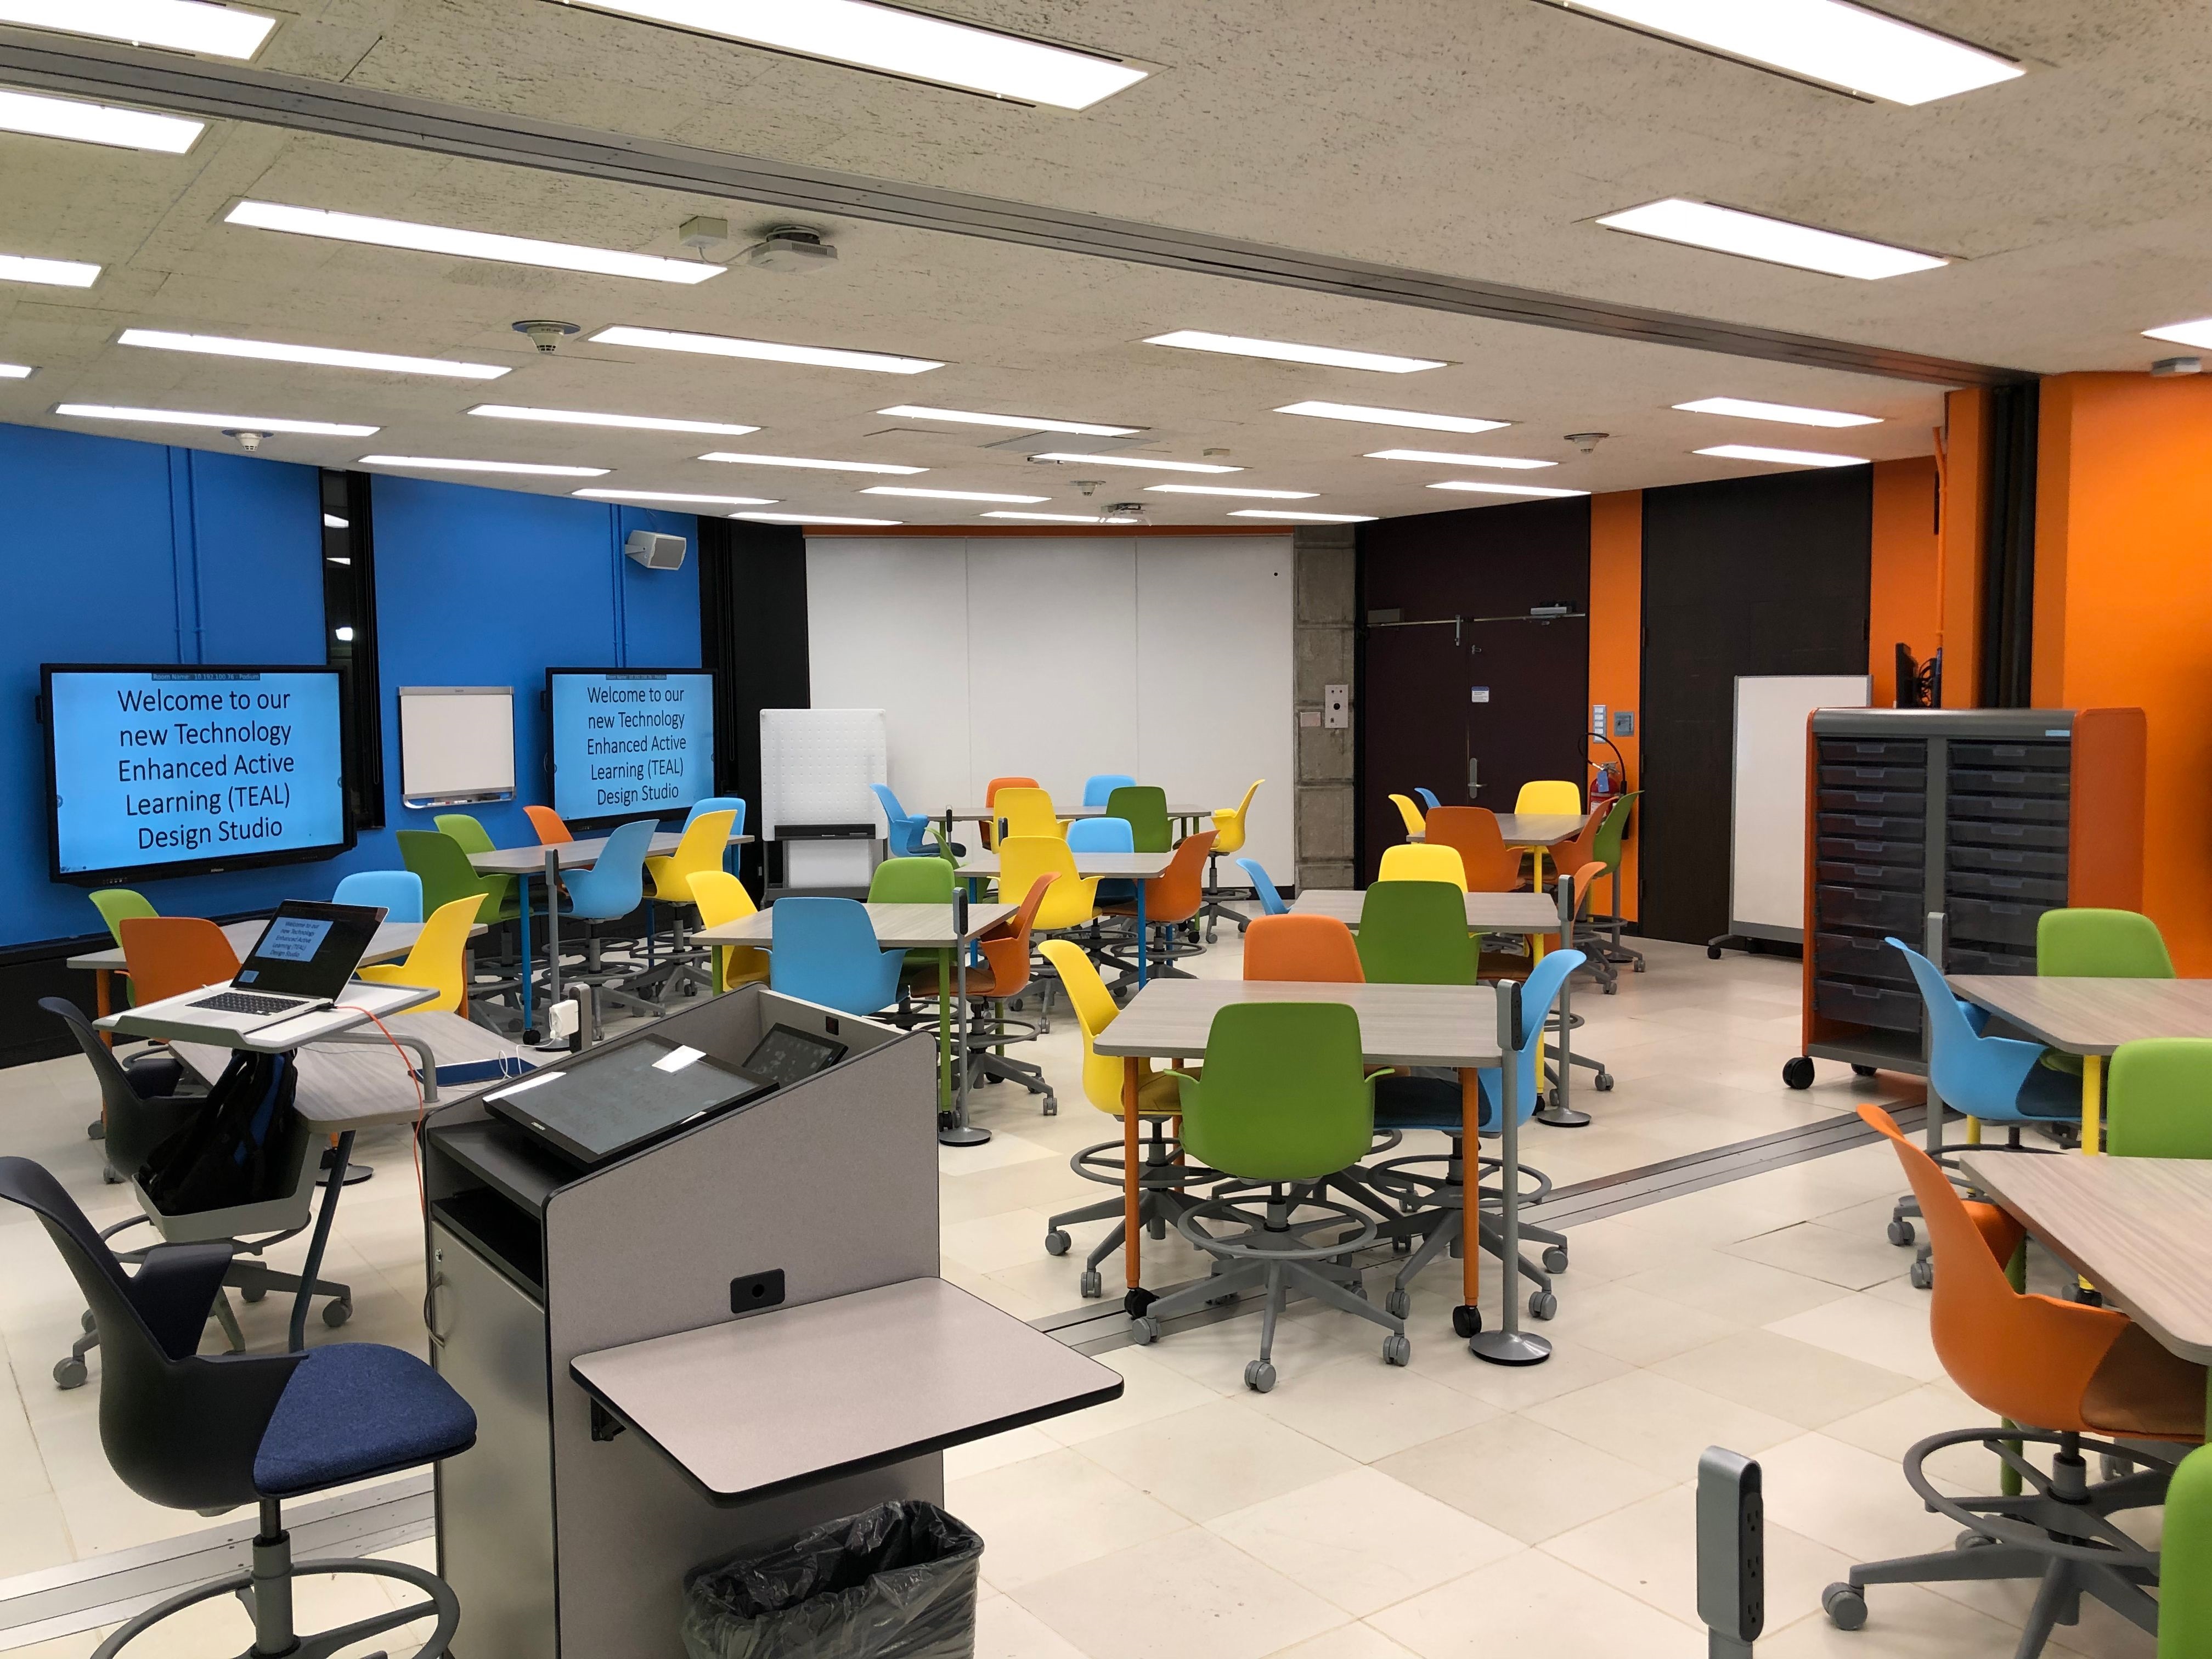  The University of Toronto implements Kramer solutions to continue interactive learning